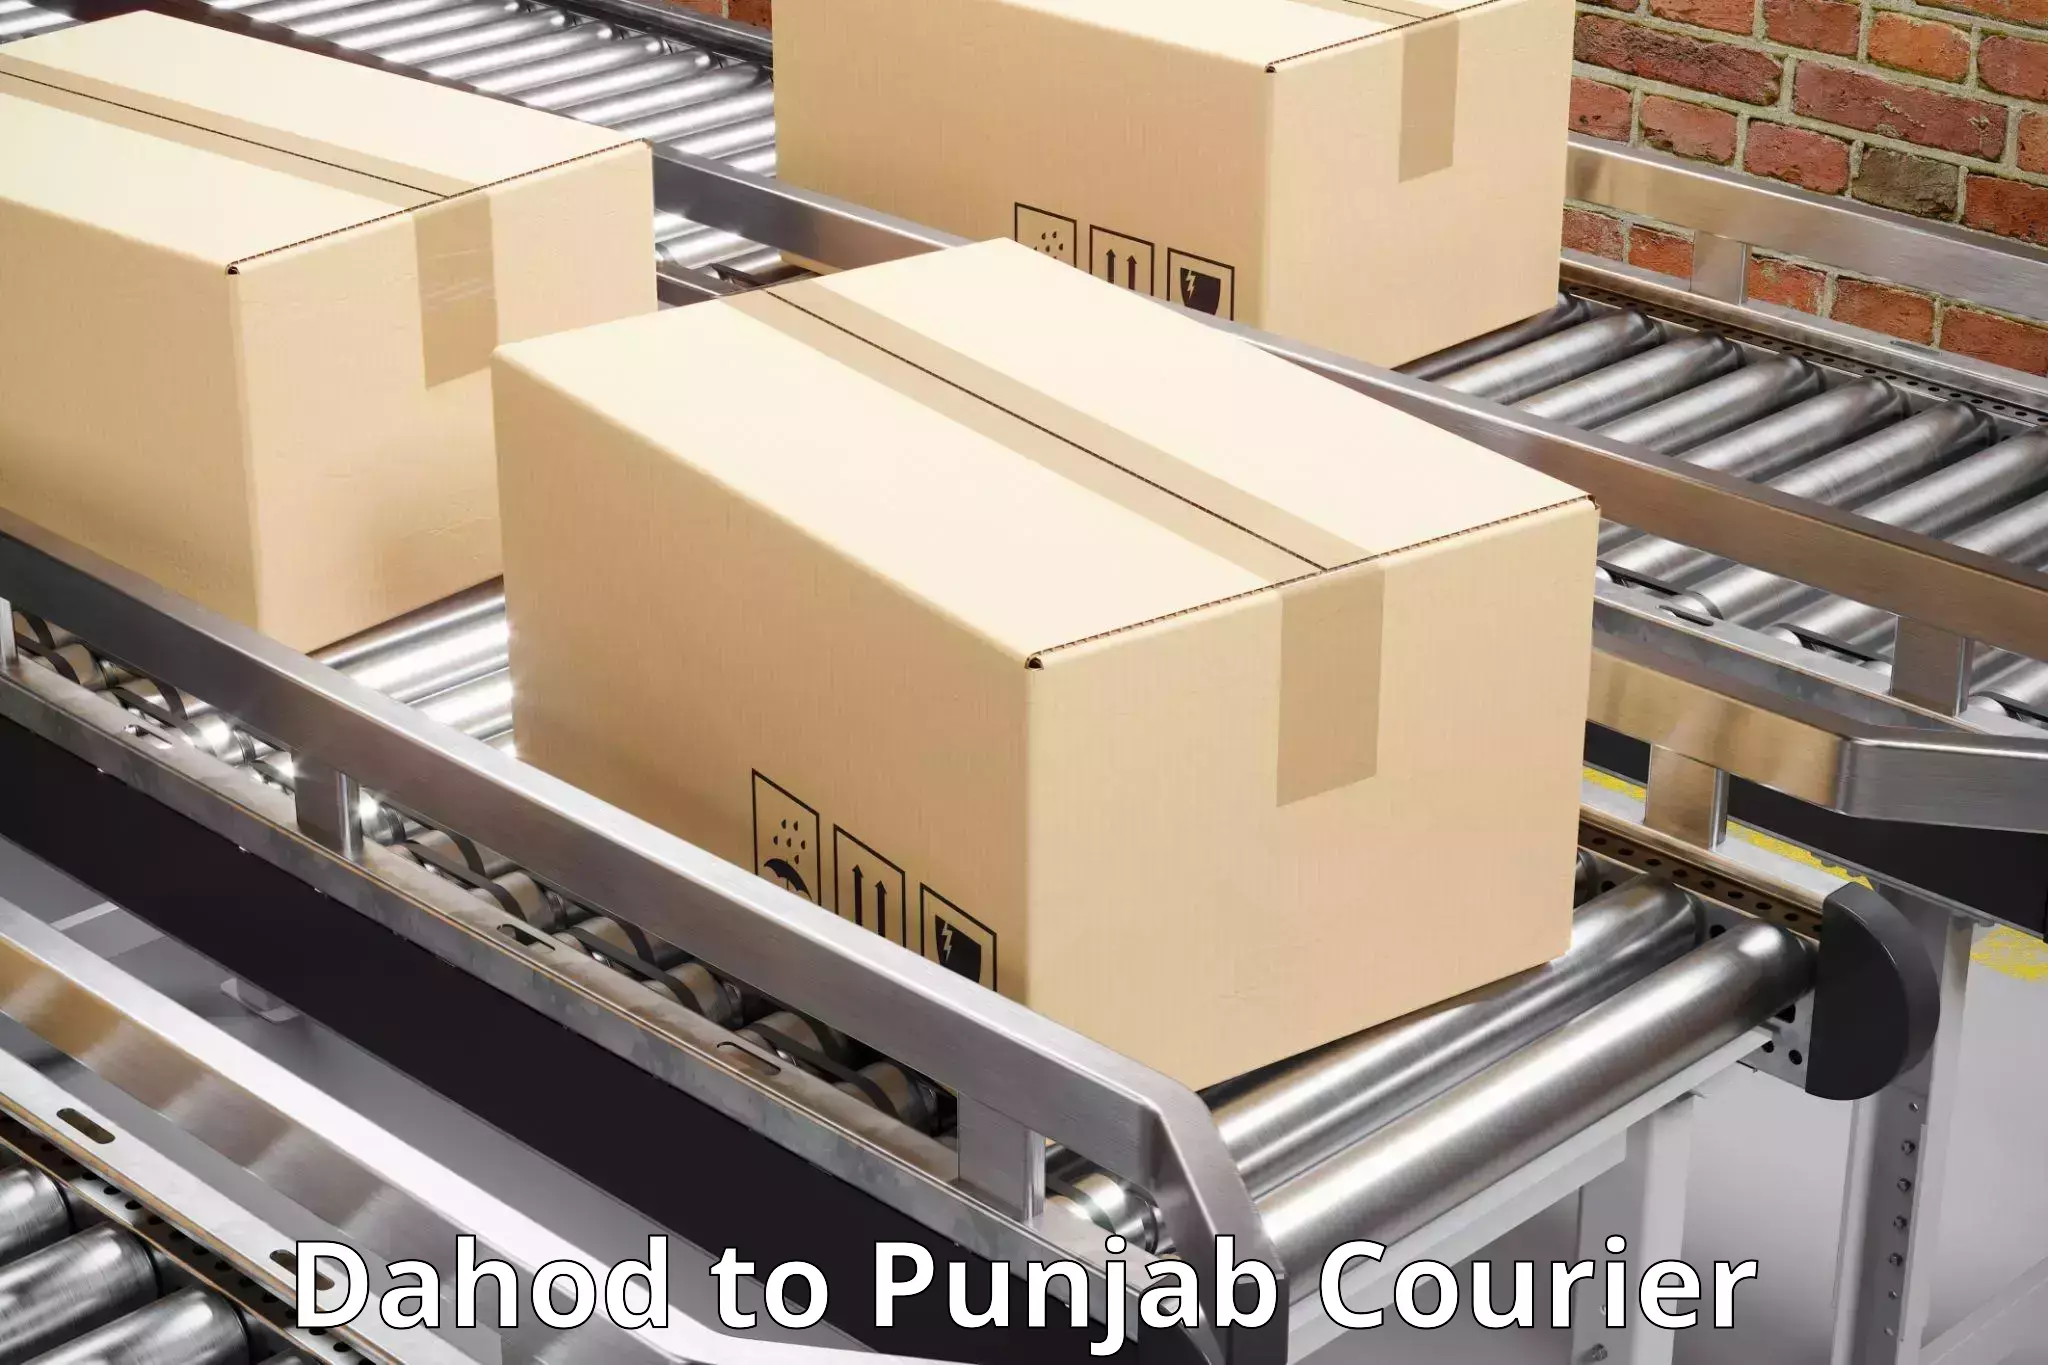 Cost-effective courier options Dahod to Central University of Punjab Bathinda